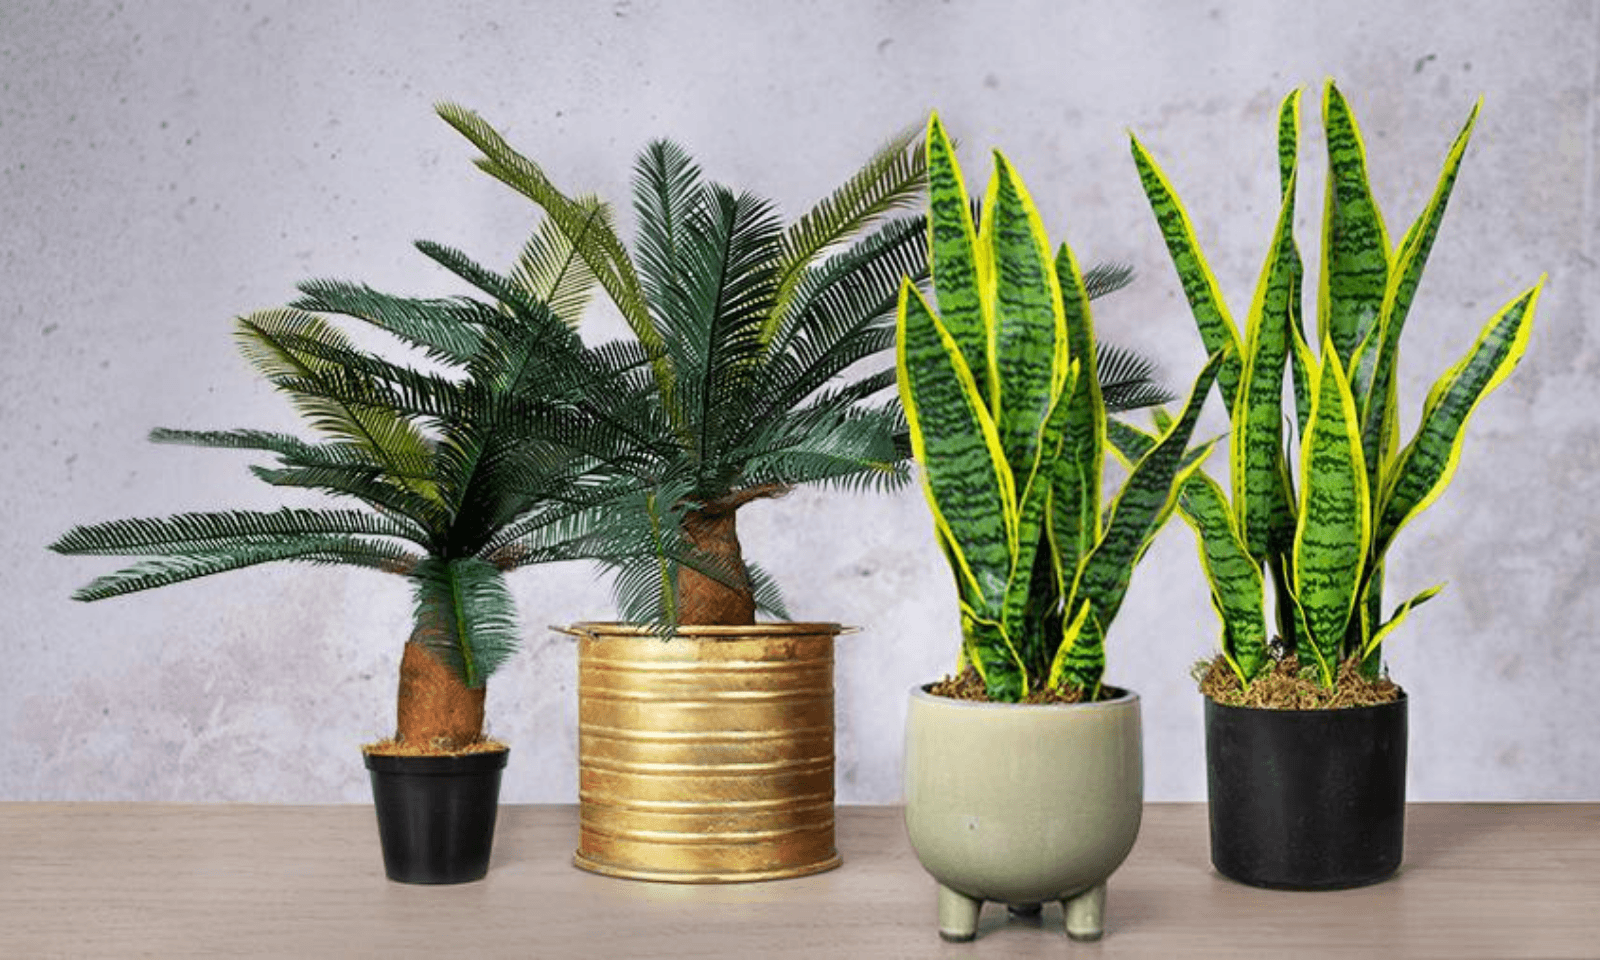 DECORATING WITH FAUX GREENERY